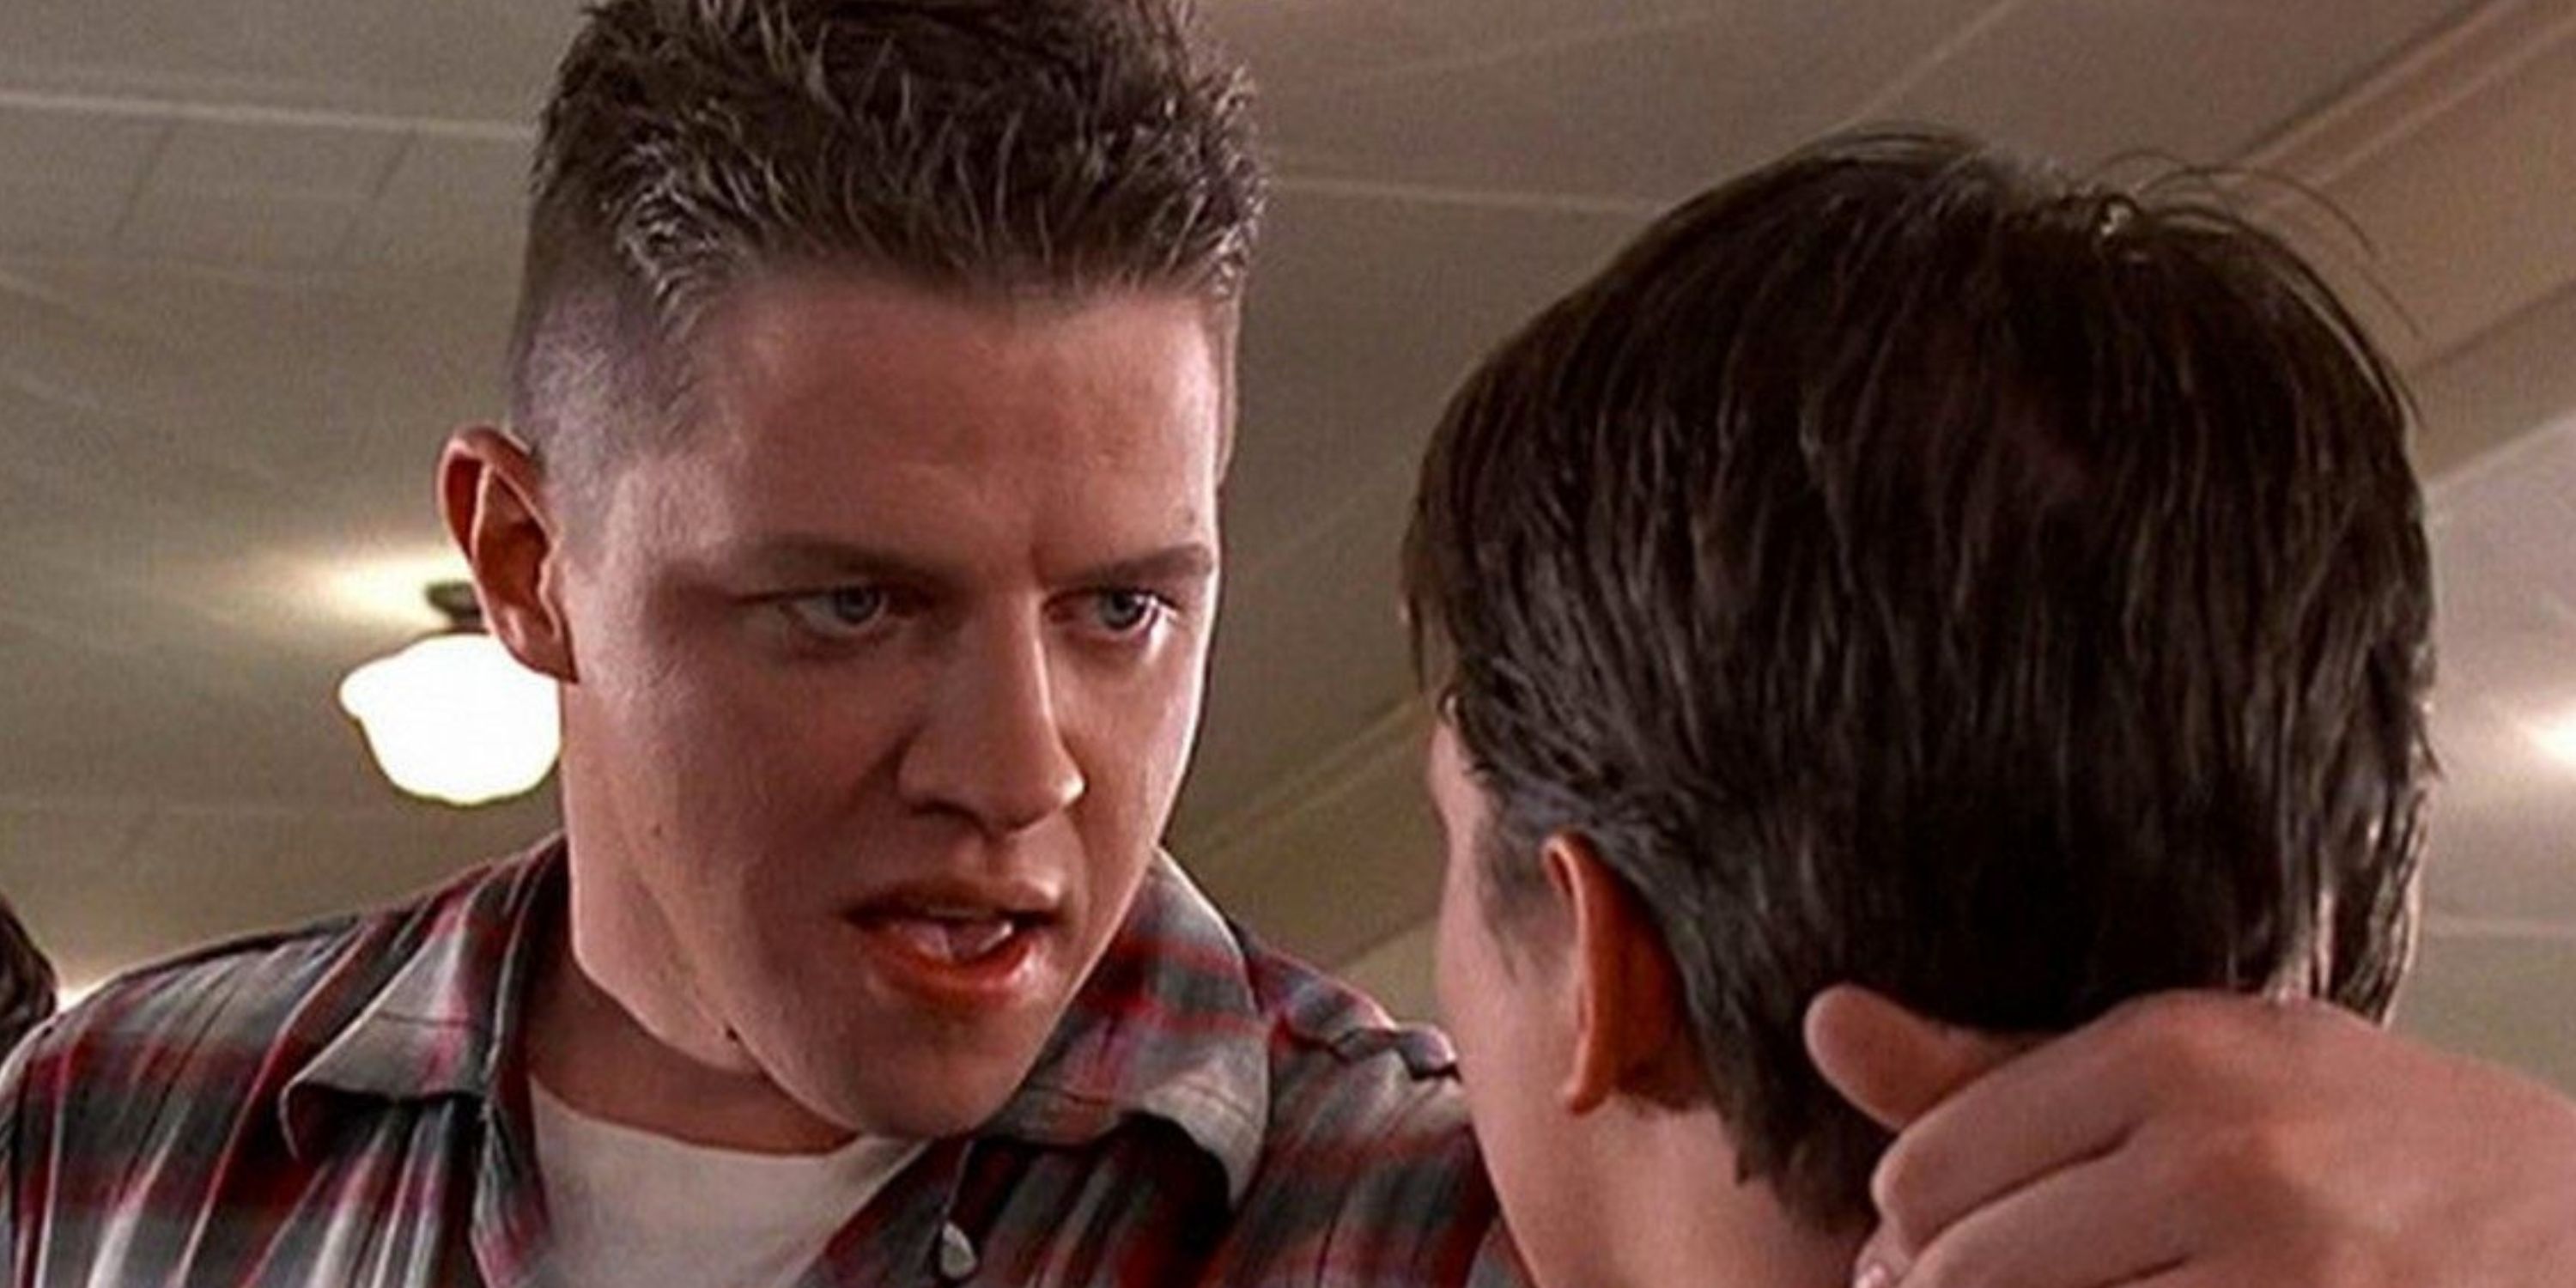 Biff and Michael J. Fox as Marty McFly in Back to the Future